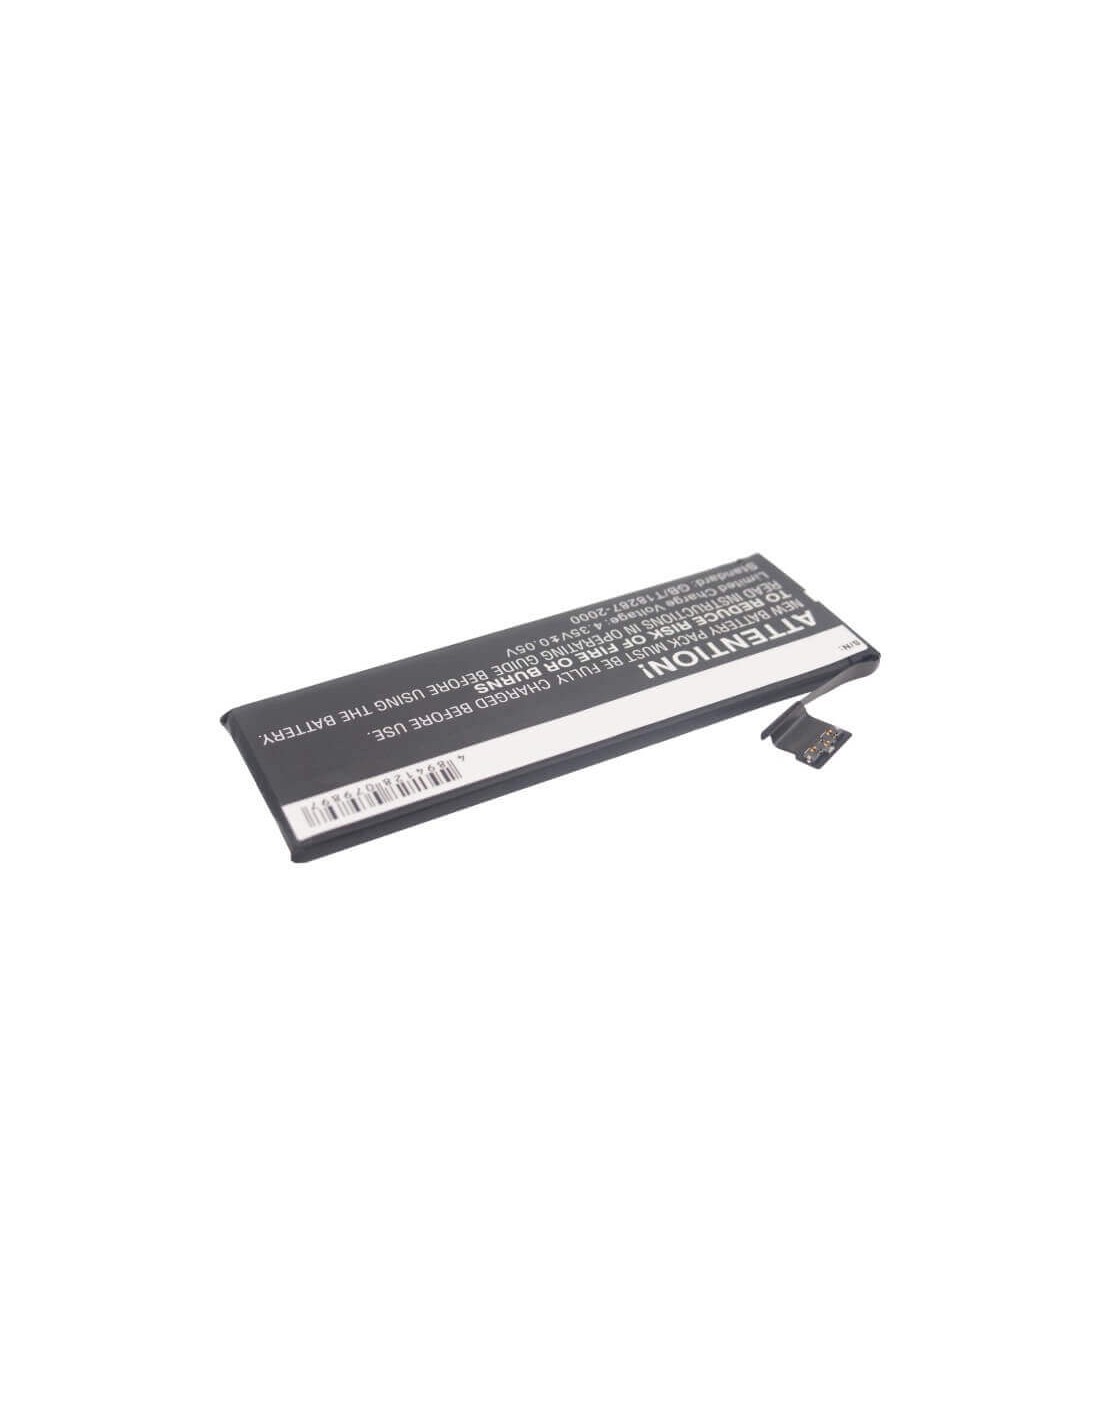 Battery for Apple iPhone 5C, iPhone Light 32GB, A1526 3.8V, 1500mAh - 5.70Wh